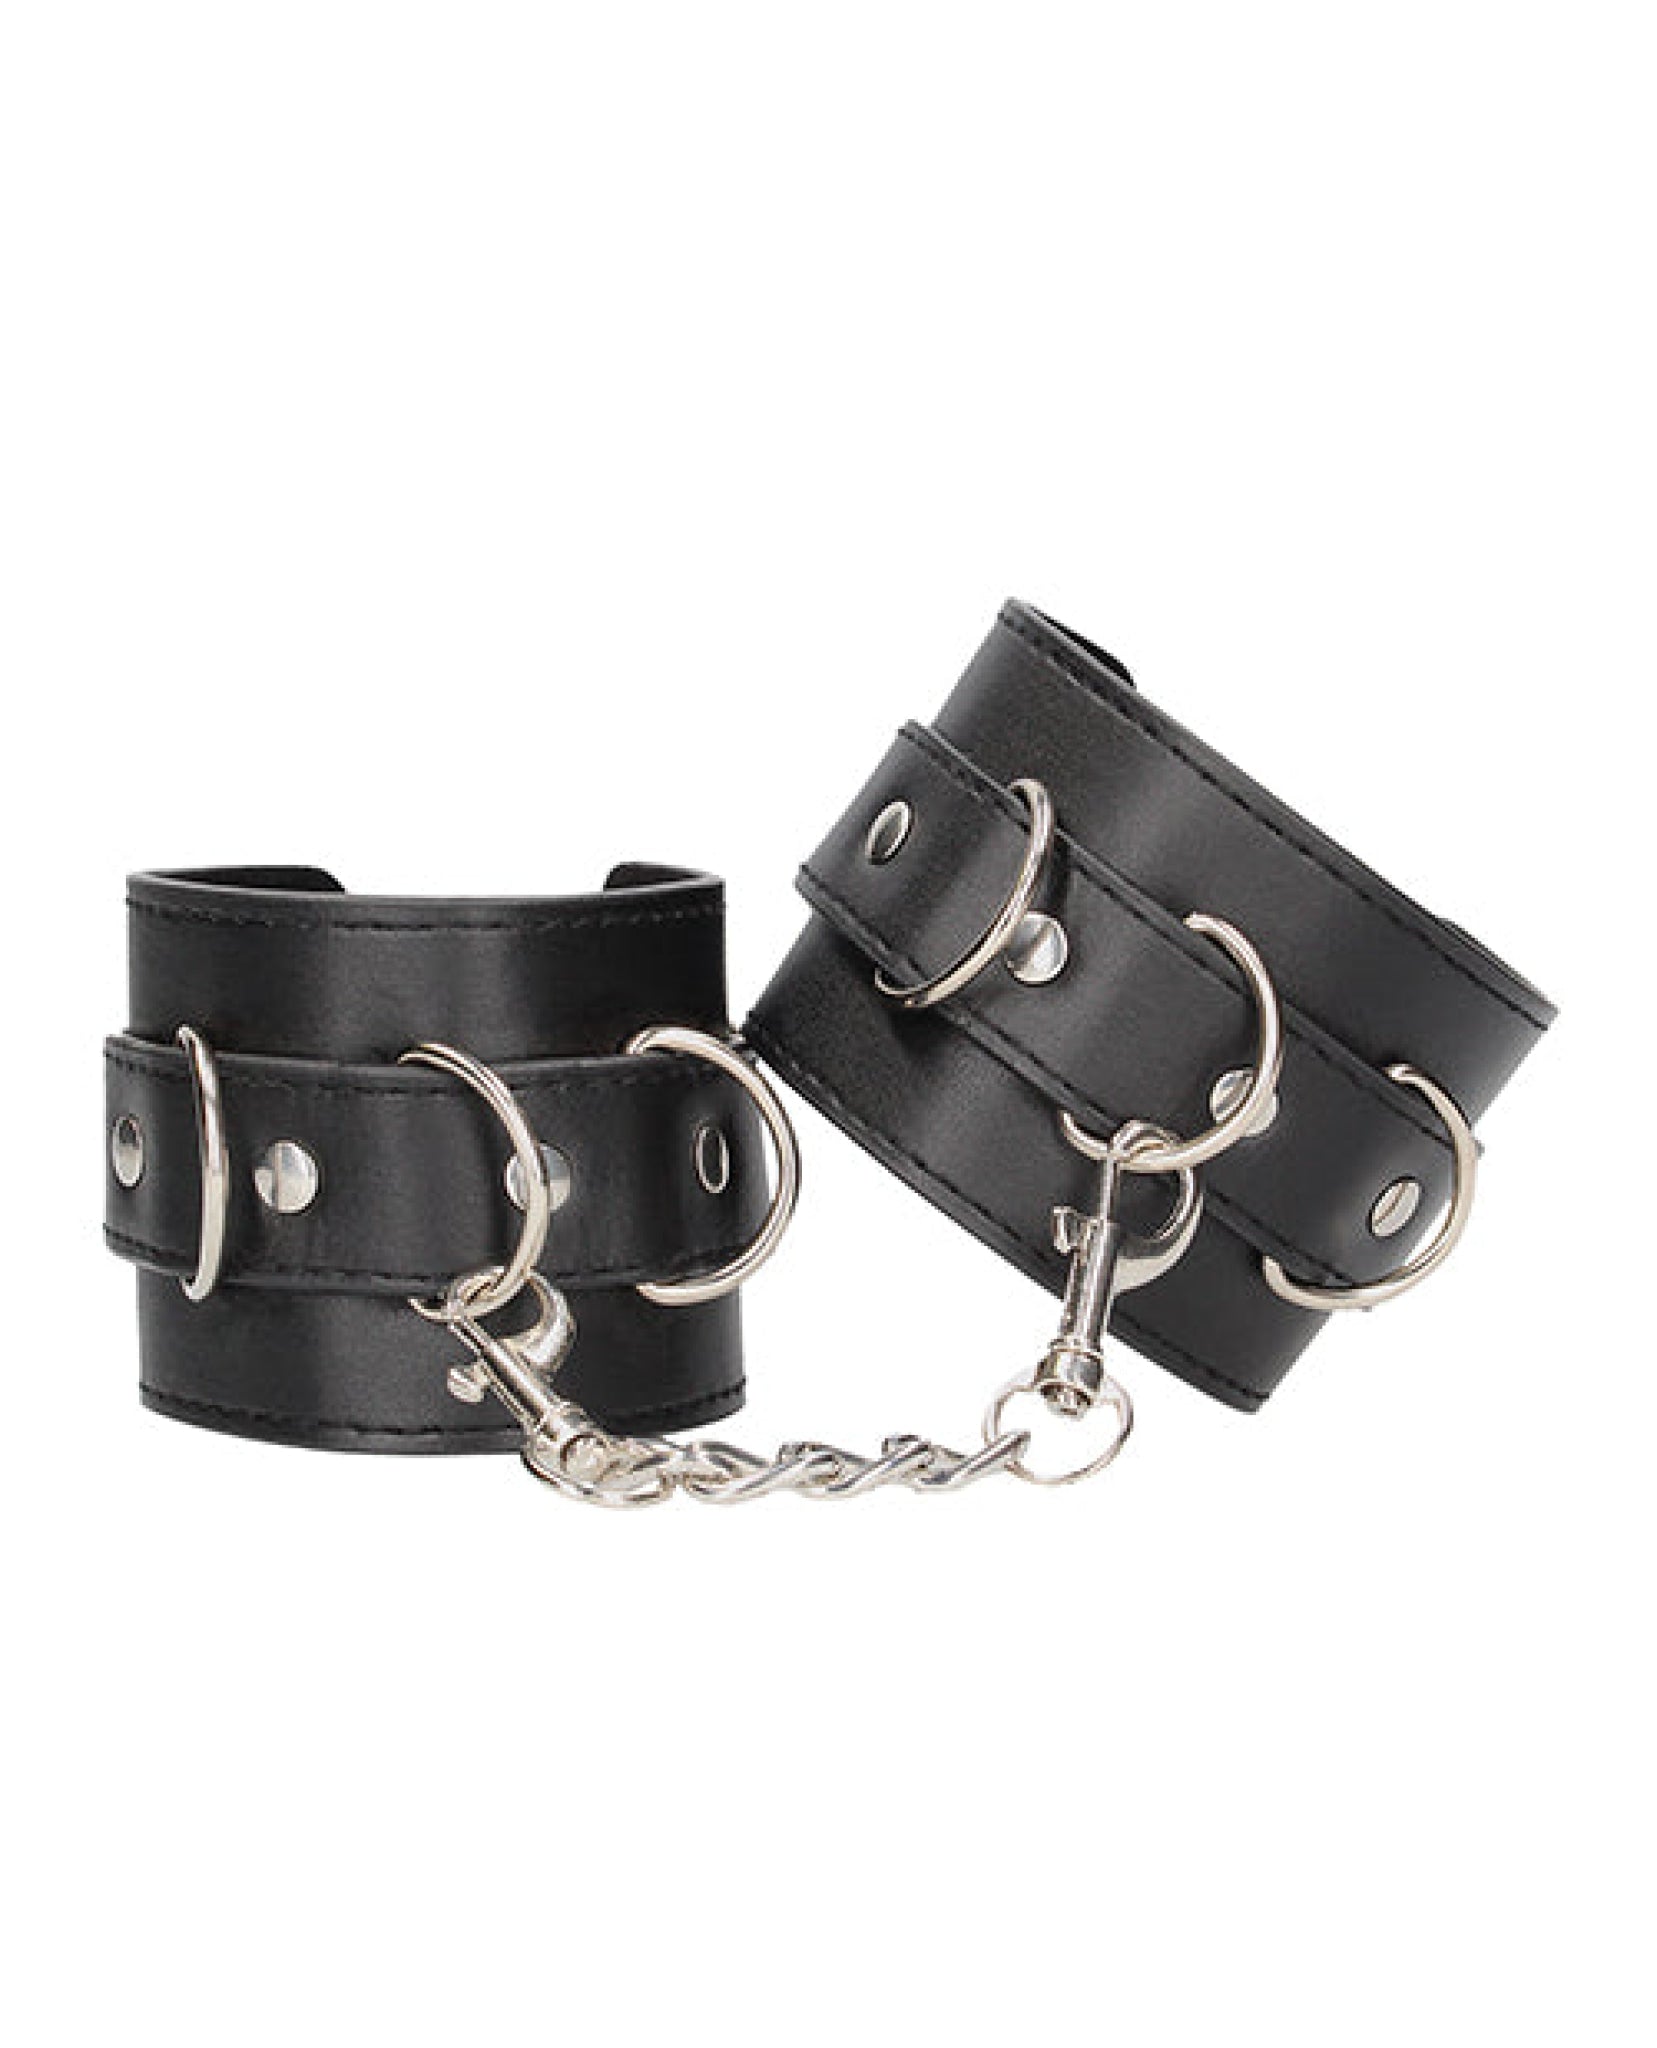 Shots Ouch Black & White Bonded Leather Hand-ankle Cuffs - Black Shots